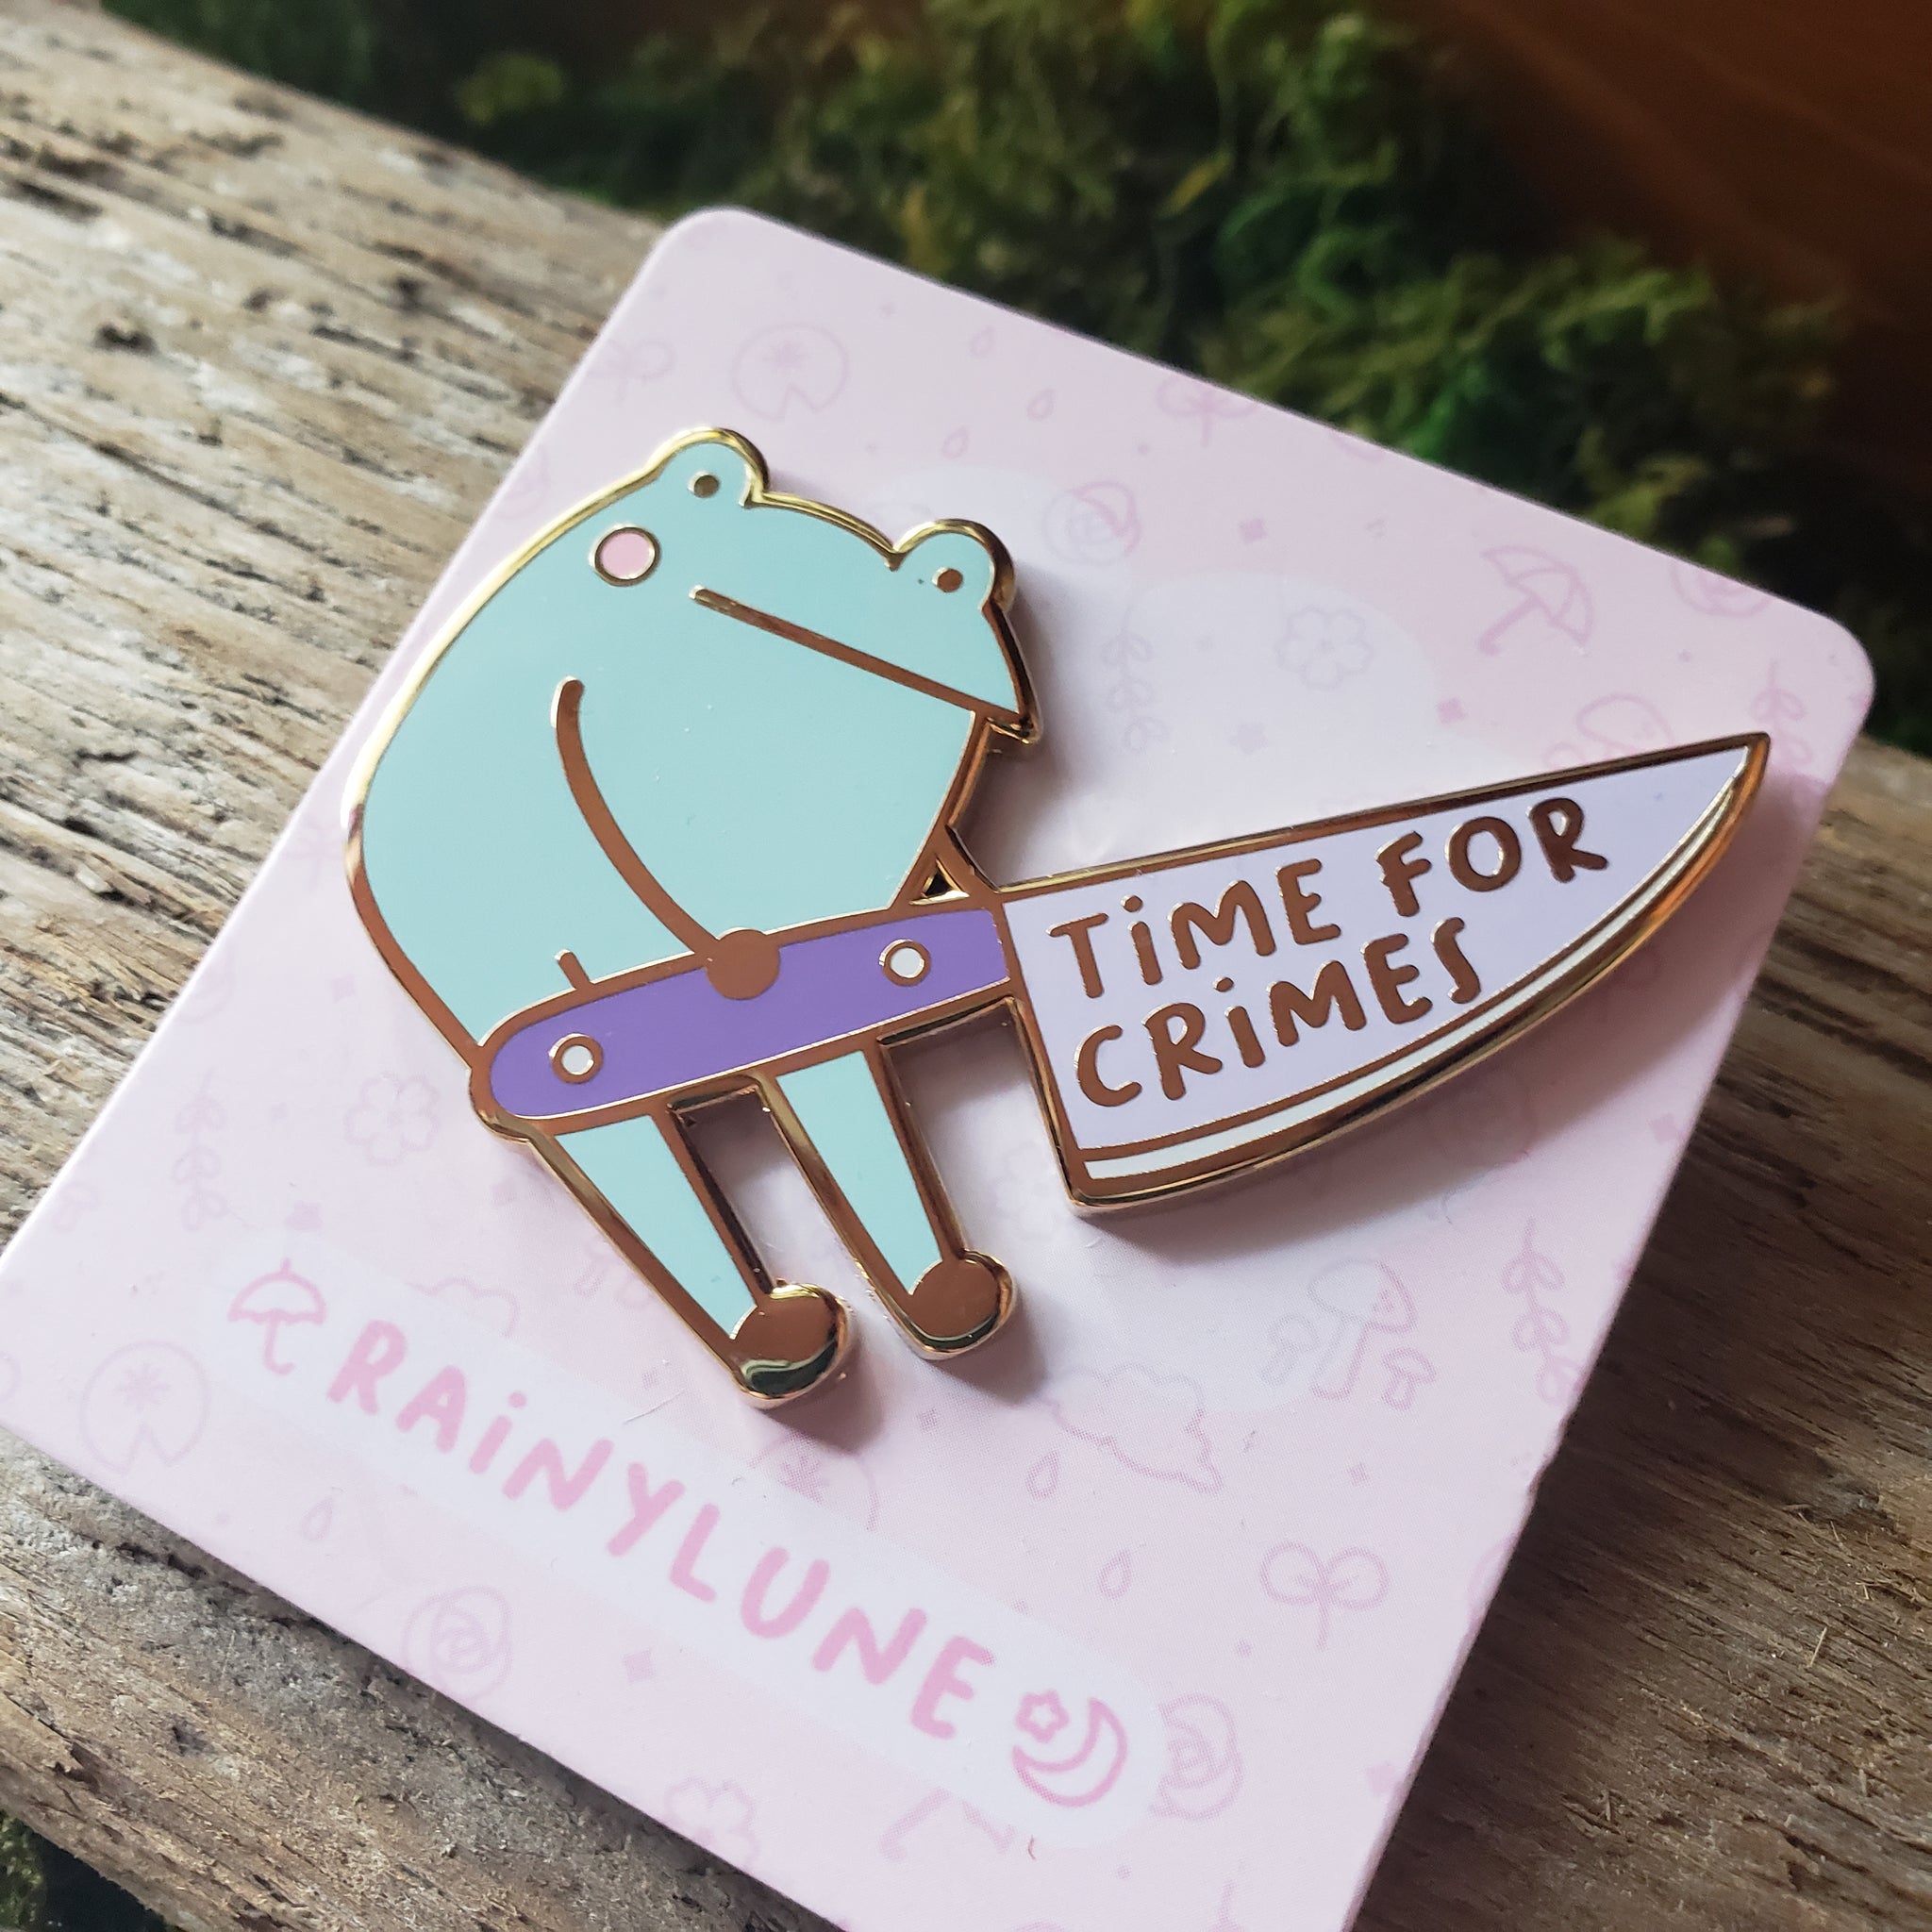 Rainylune: Son The Frog Time for Crimes Knife Pin (default)